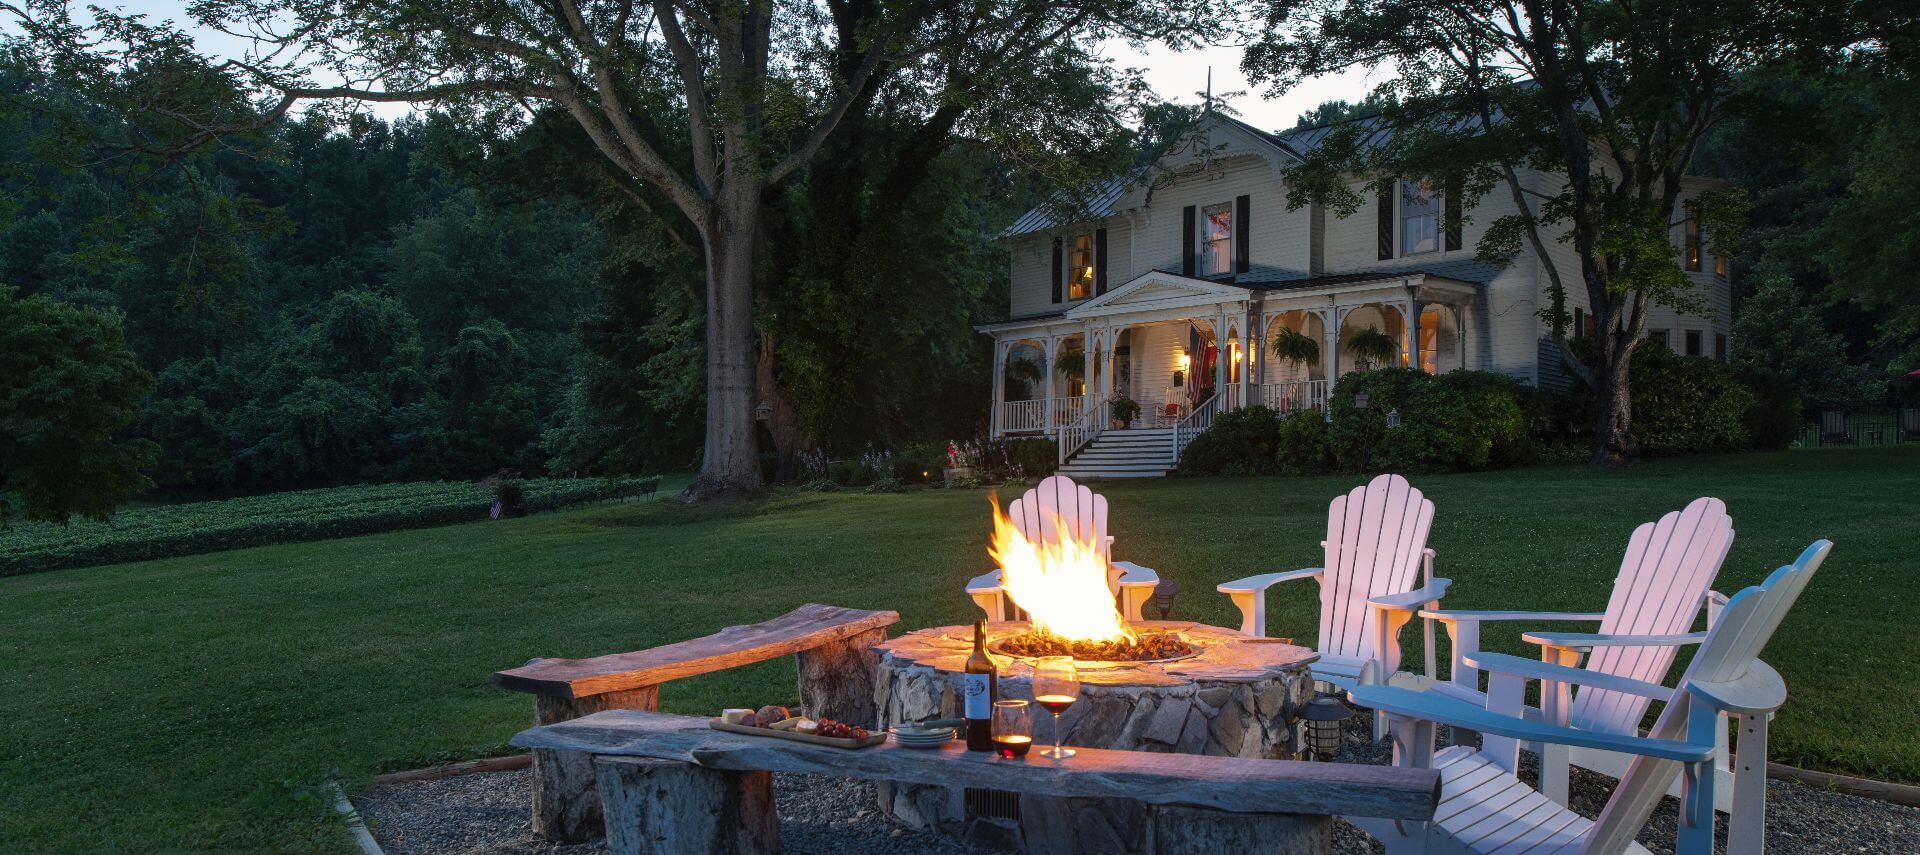 Chairs around a fire pit on a green lawn outside a large white manor house